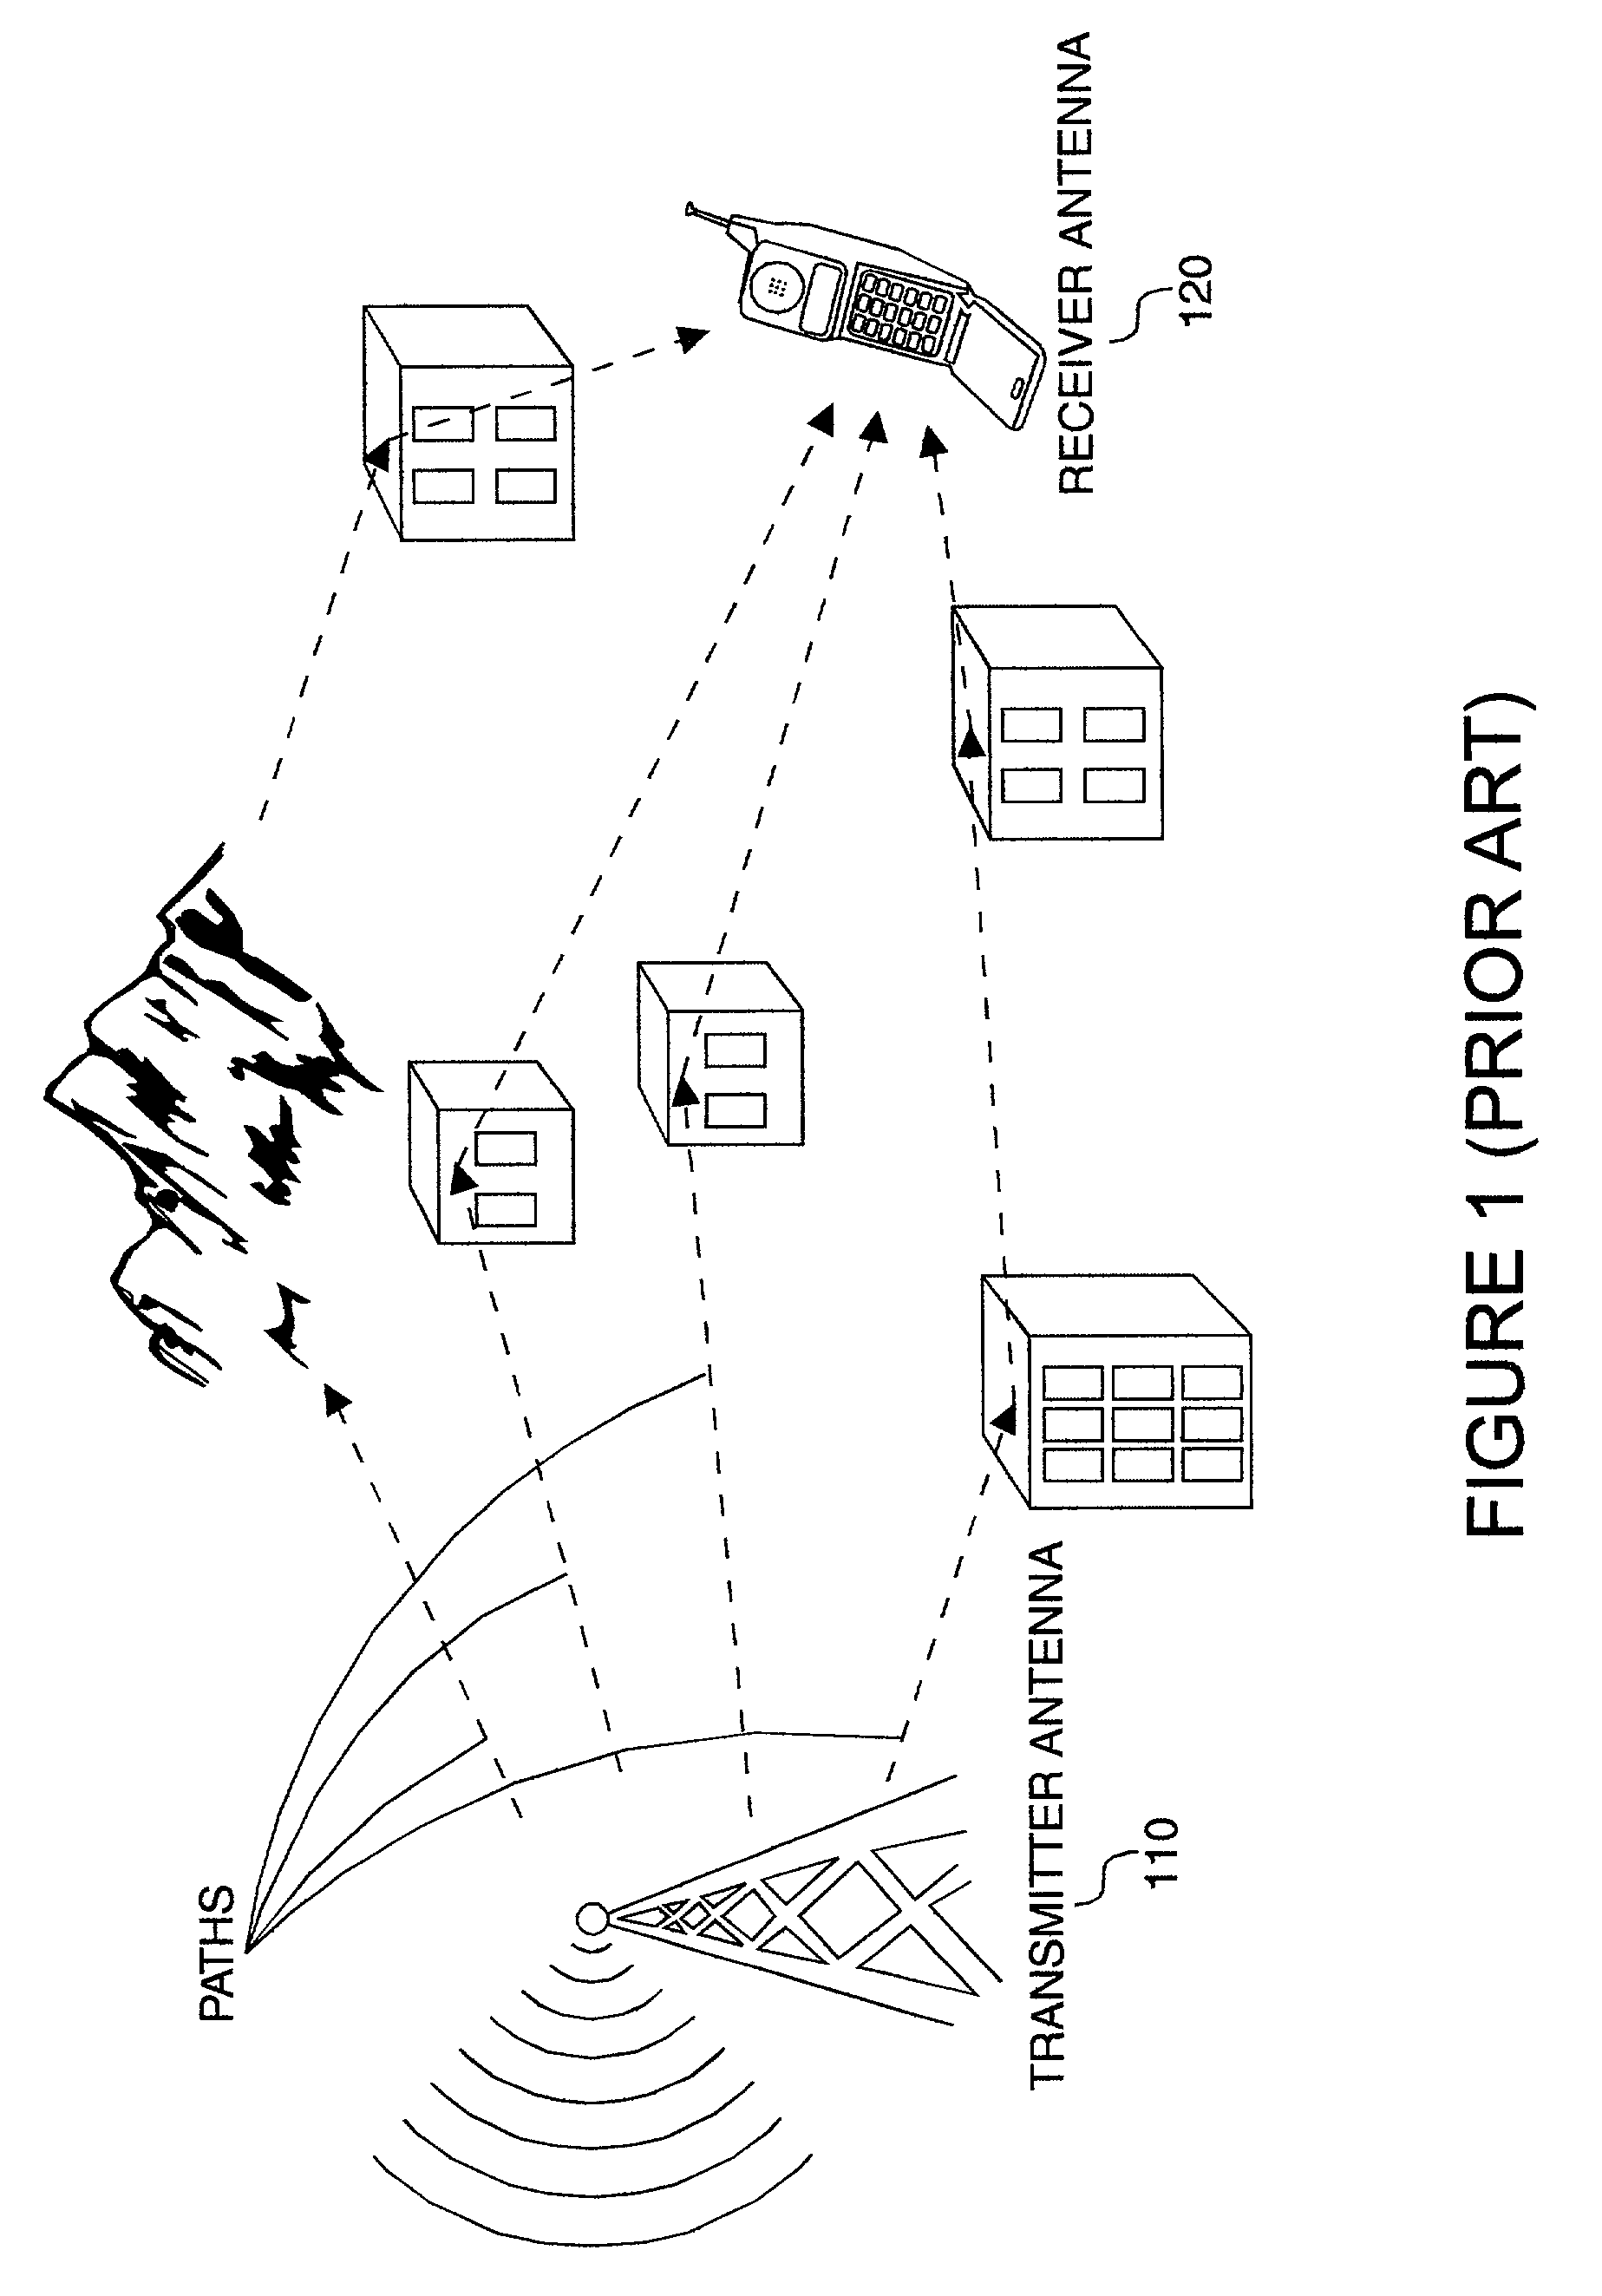 System and method for multiple signal carrier time domain channel estimation